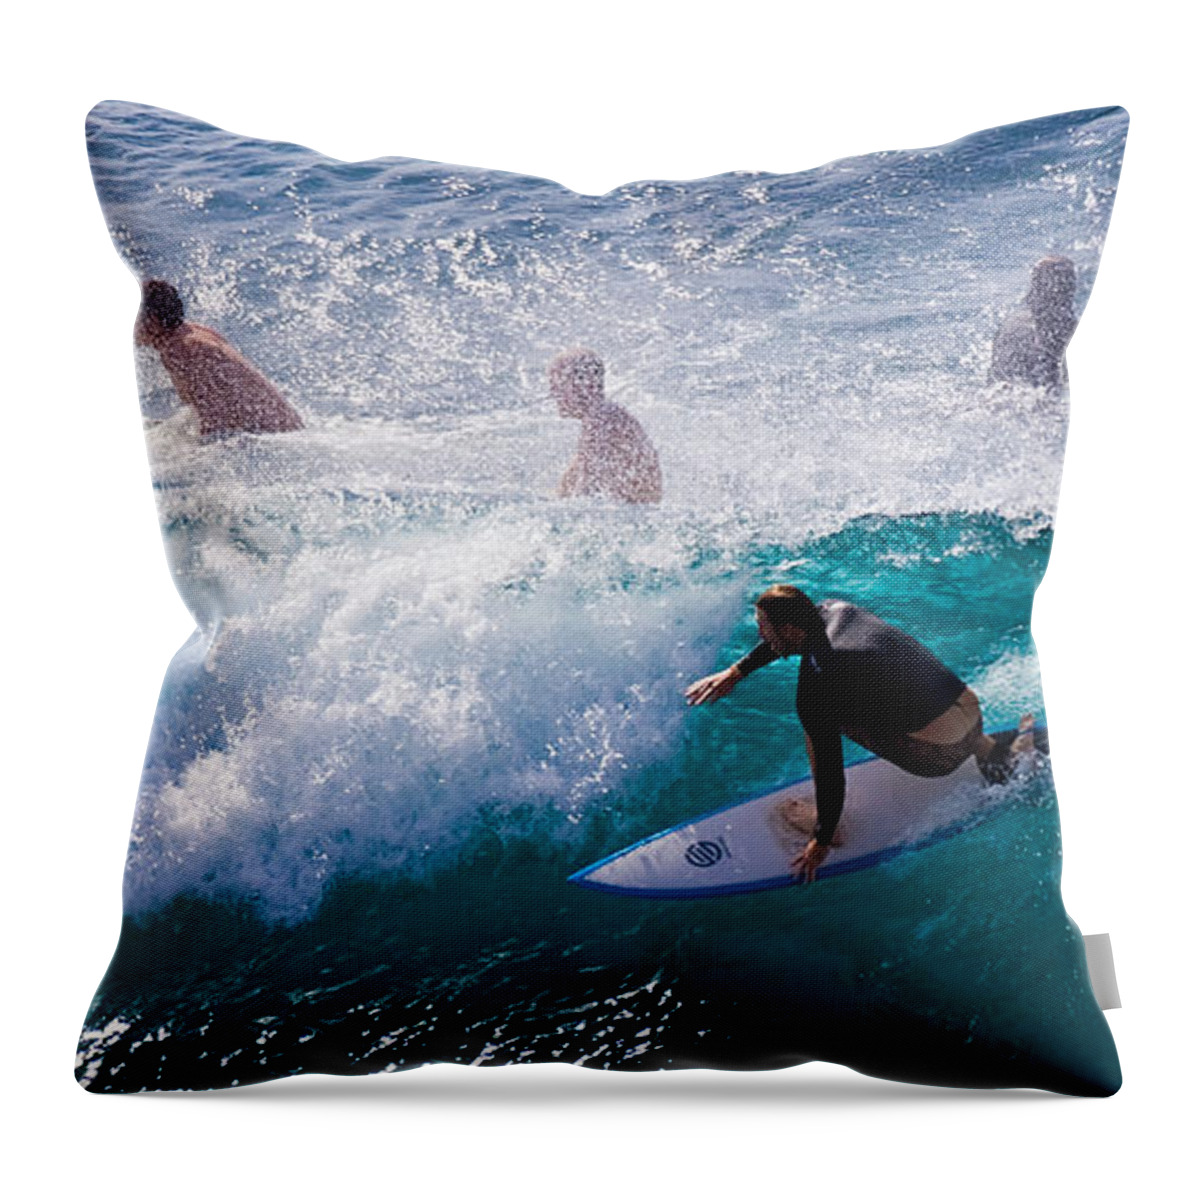 3scape Photos Throw Pillow featuring the photograph Surfing Maui by Adam Romanowicz